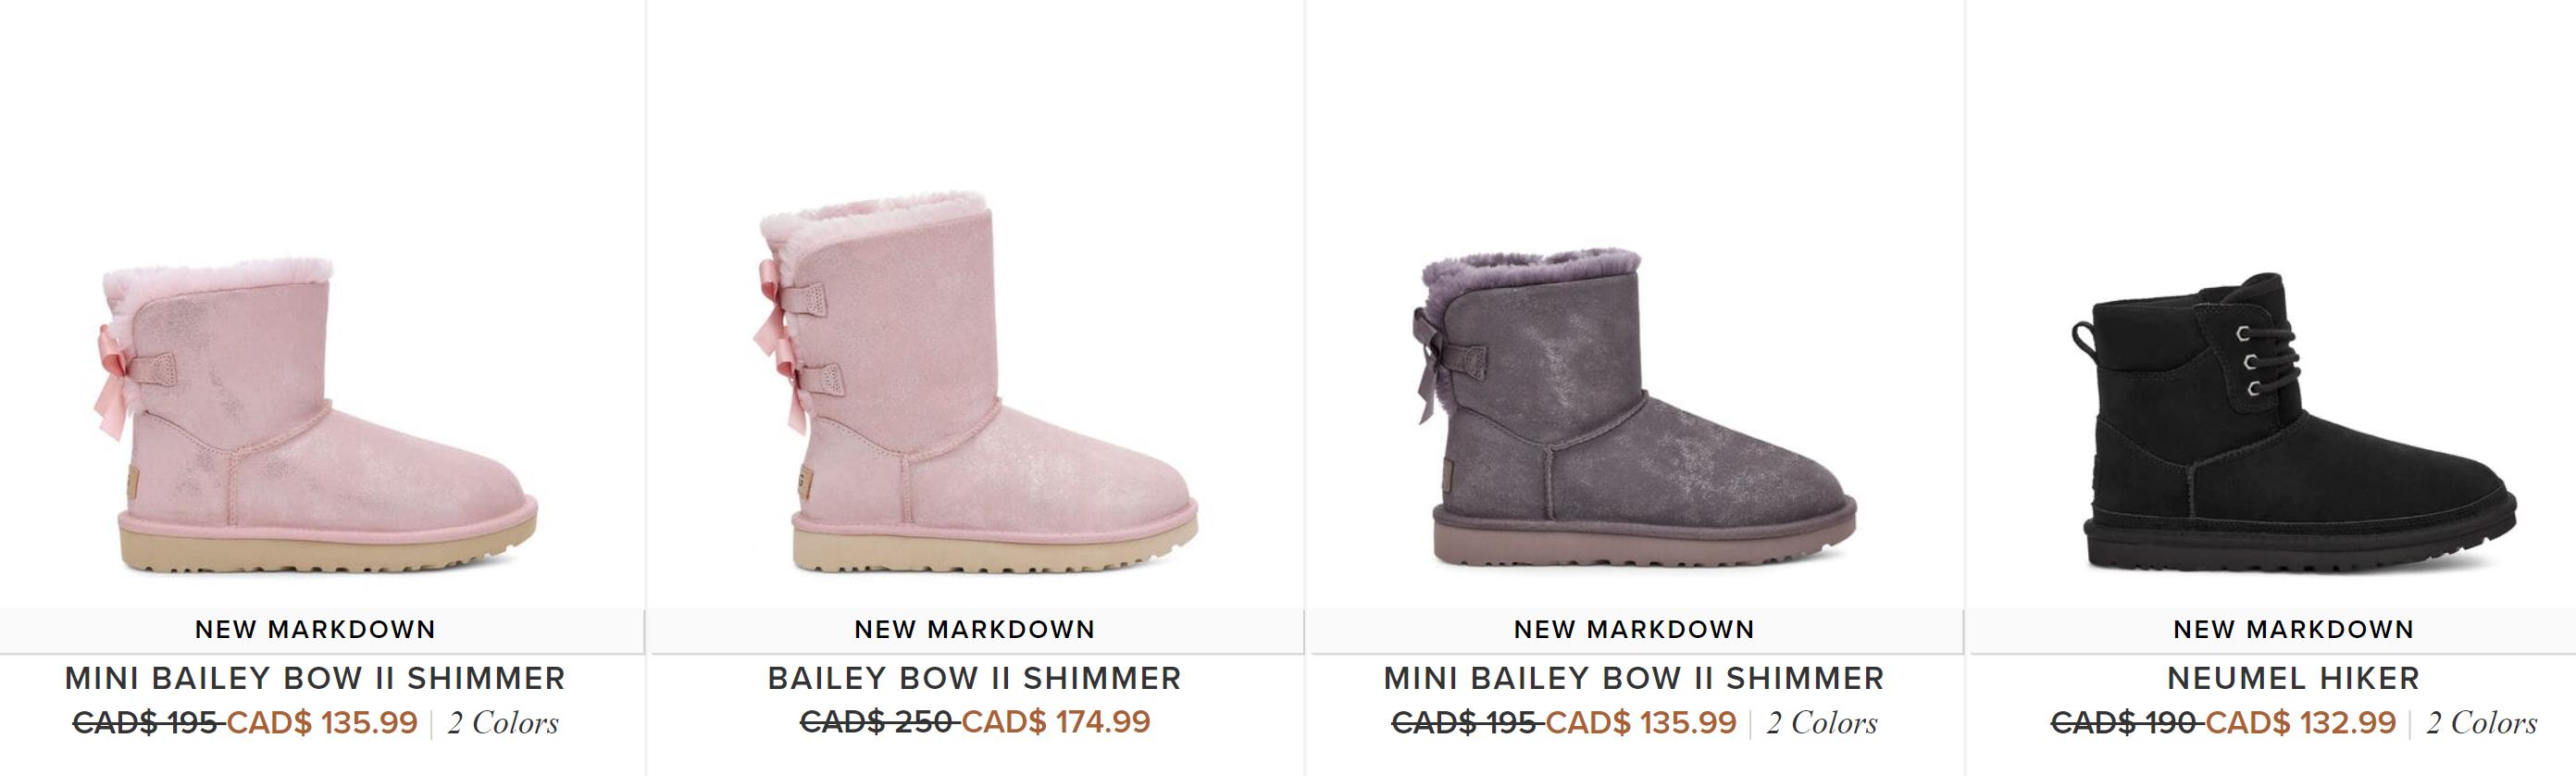 ugg-cold-winter-warm-single-product-as-low-as-30-off-take-a-lovely-cold-hat-2020-12-8